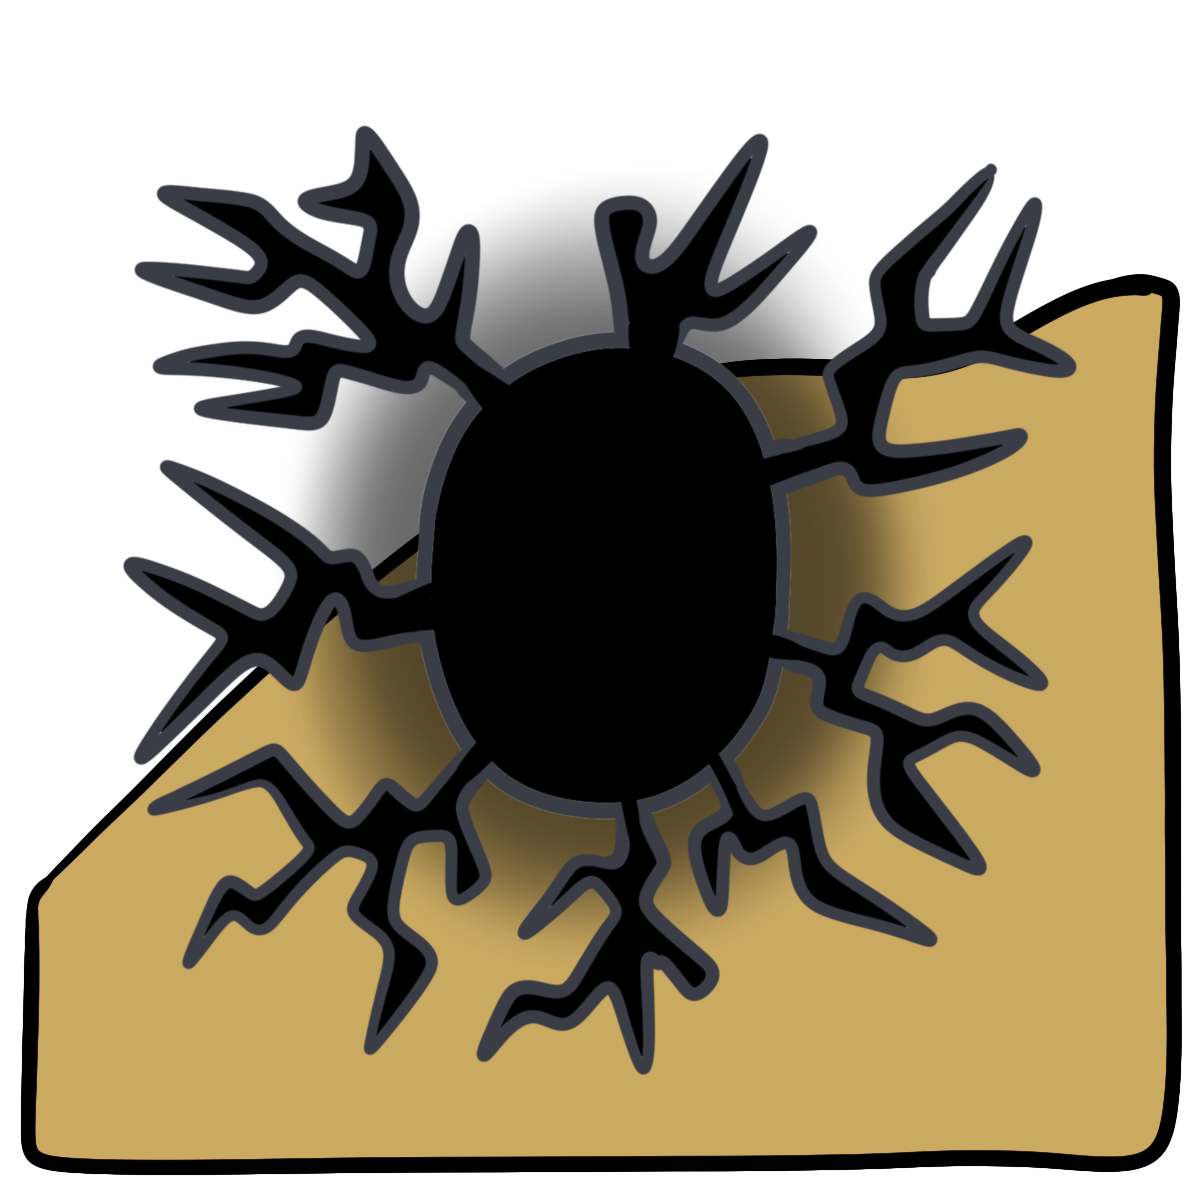 A black glowing oval with branching pointy lines coming from its sides. Curved yellow skin fills the bottom half of the background.